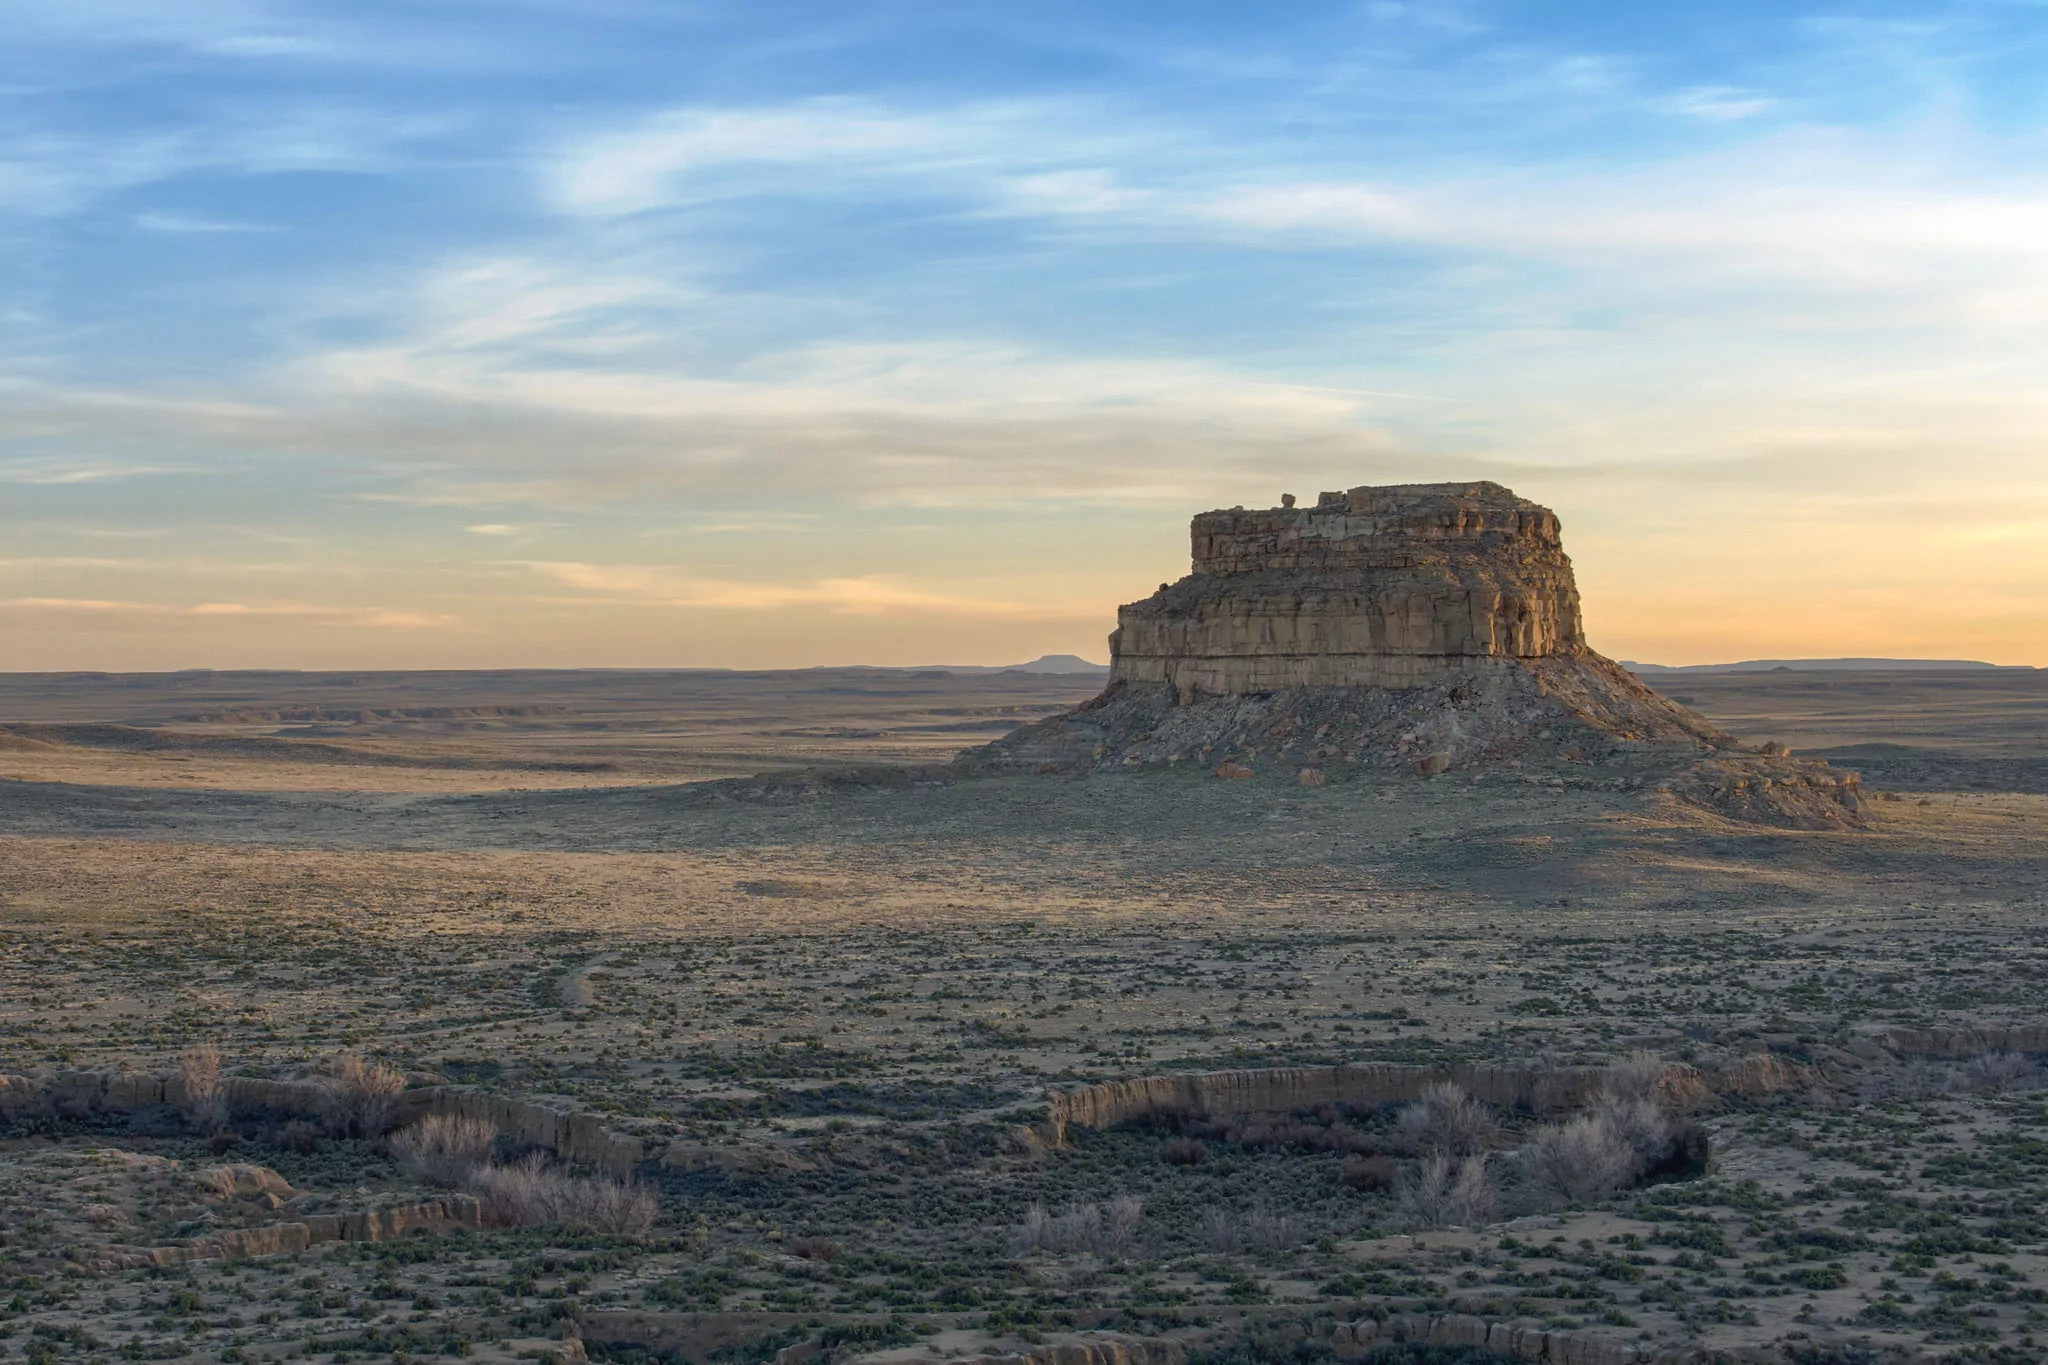 Fajada Butte in New Mexico's Chaco Canyon